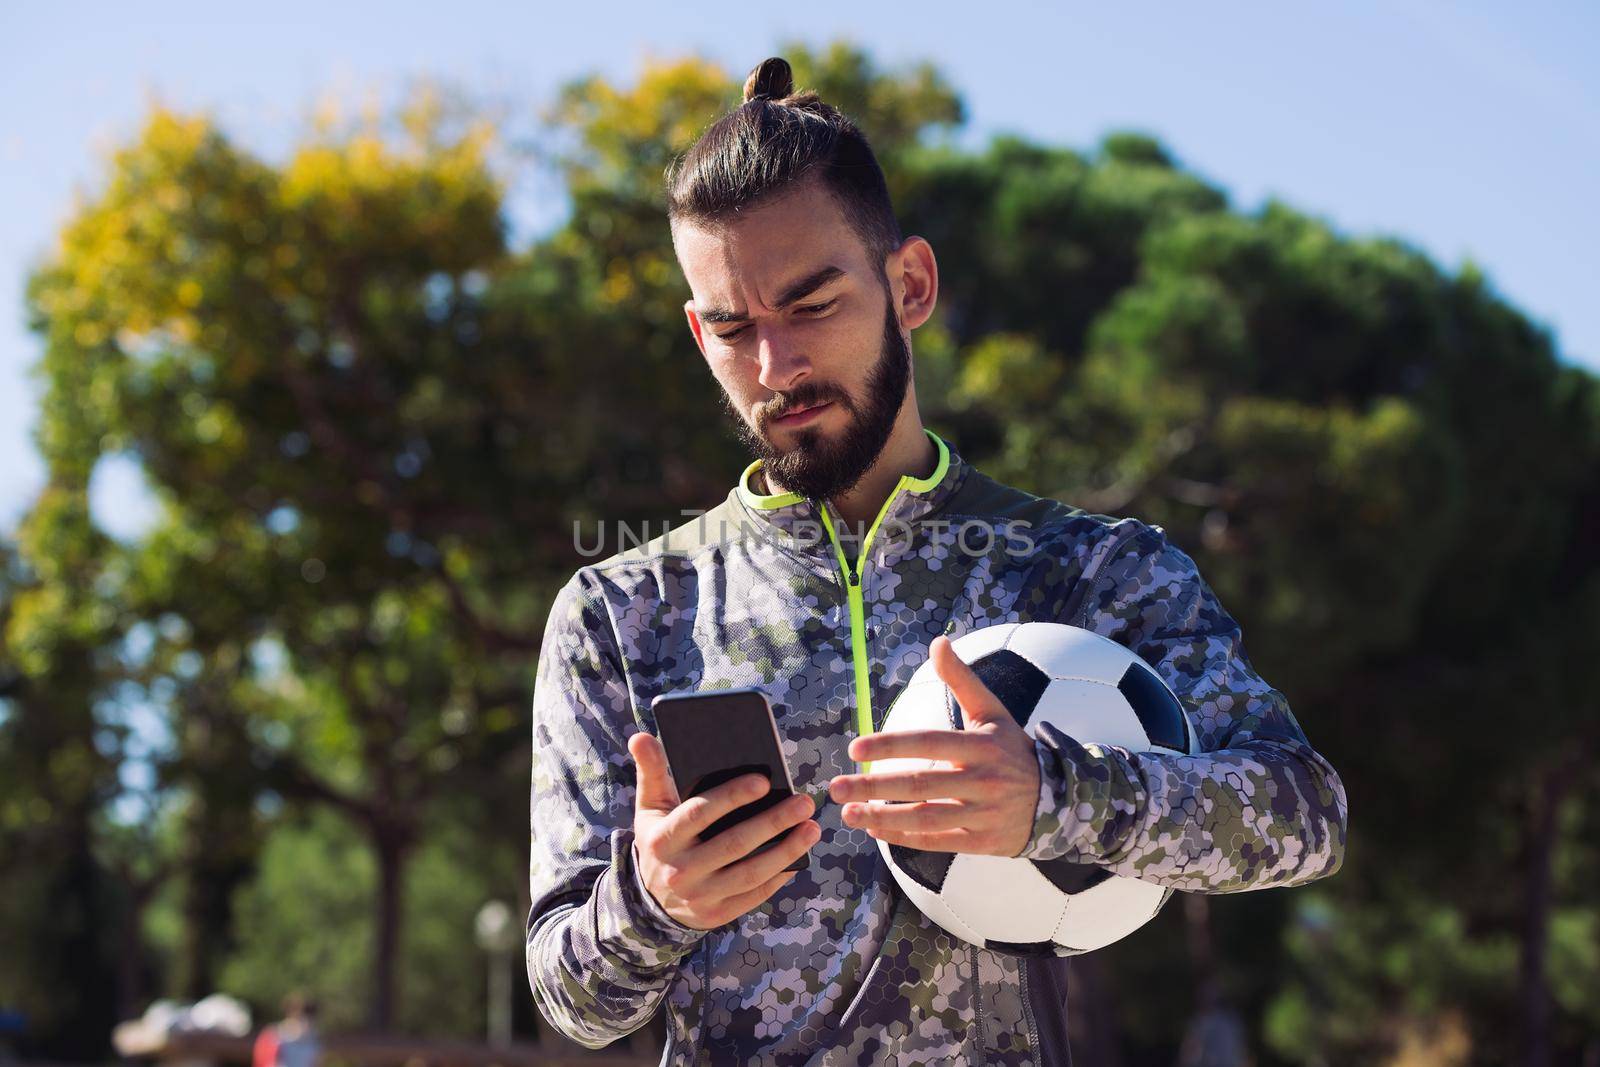 fashionable sportsman with a soccer ball consulting his mobile phone with confused expression due to an unexpected message, concept of technology and urban sport lifestyle in the city